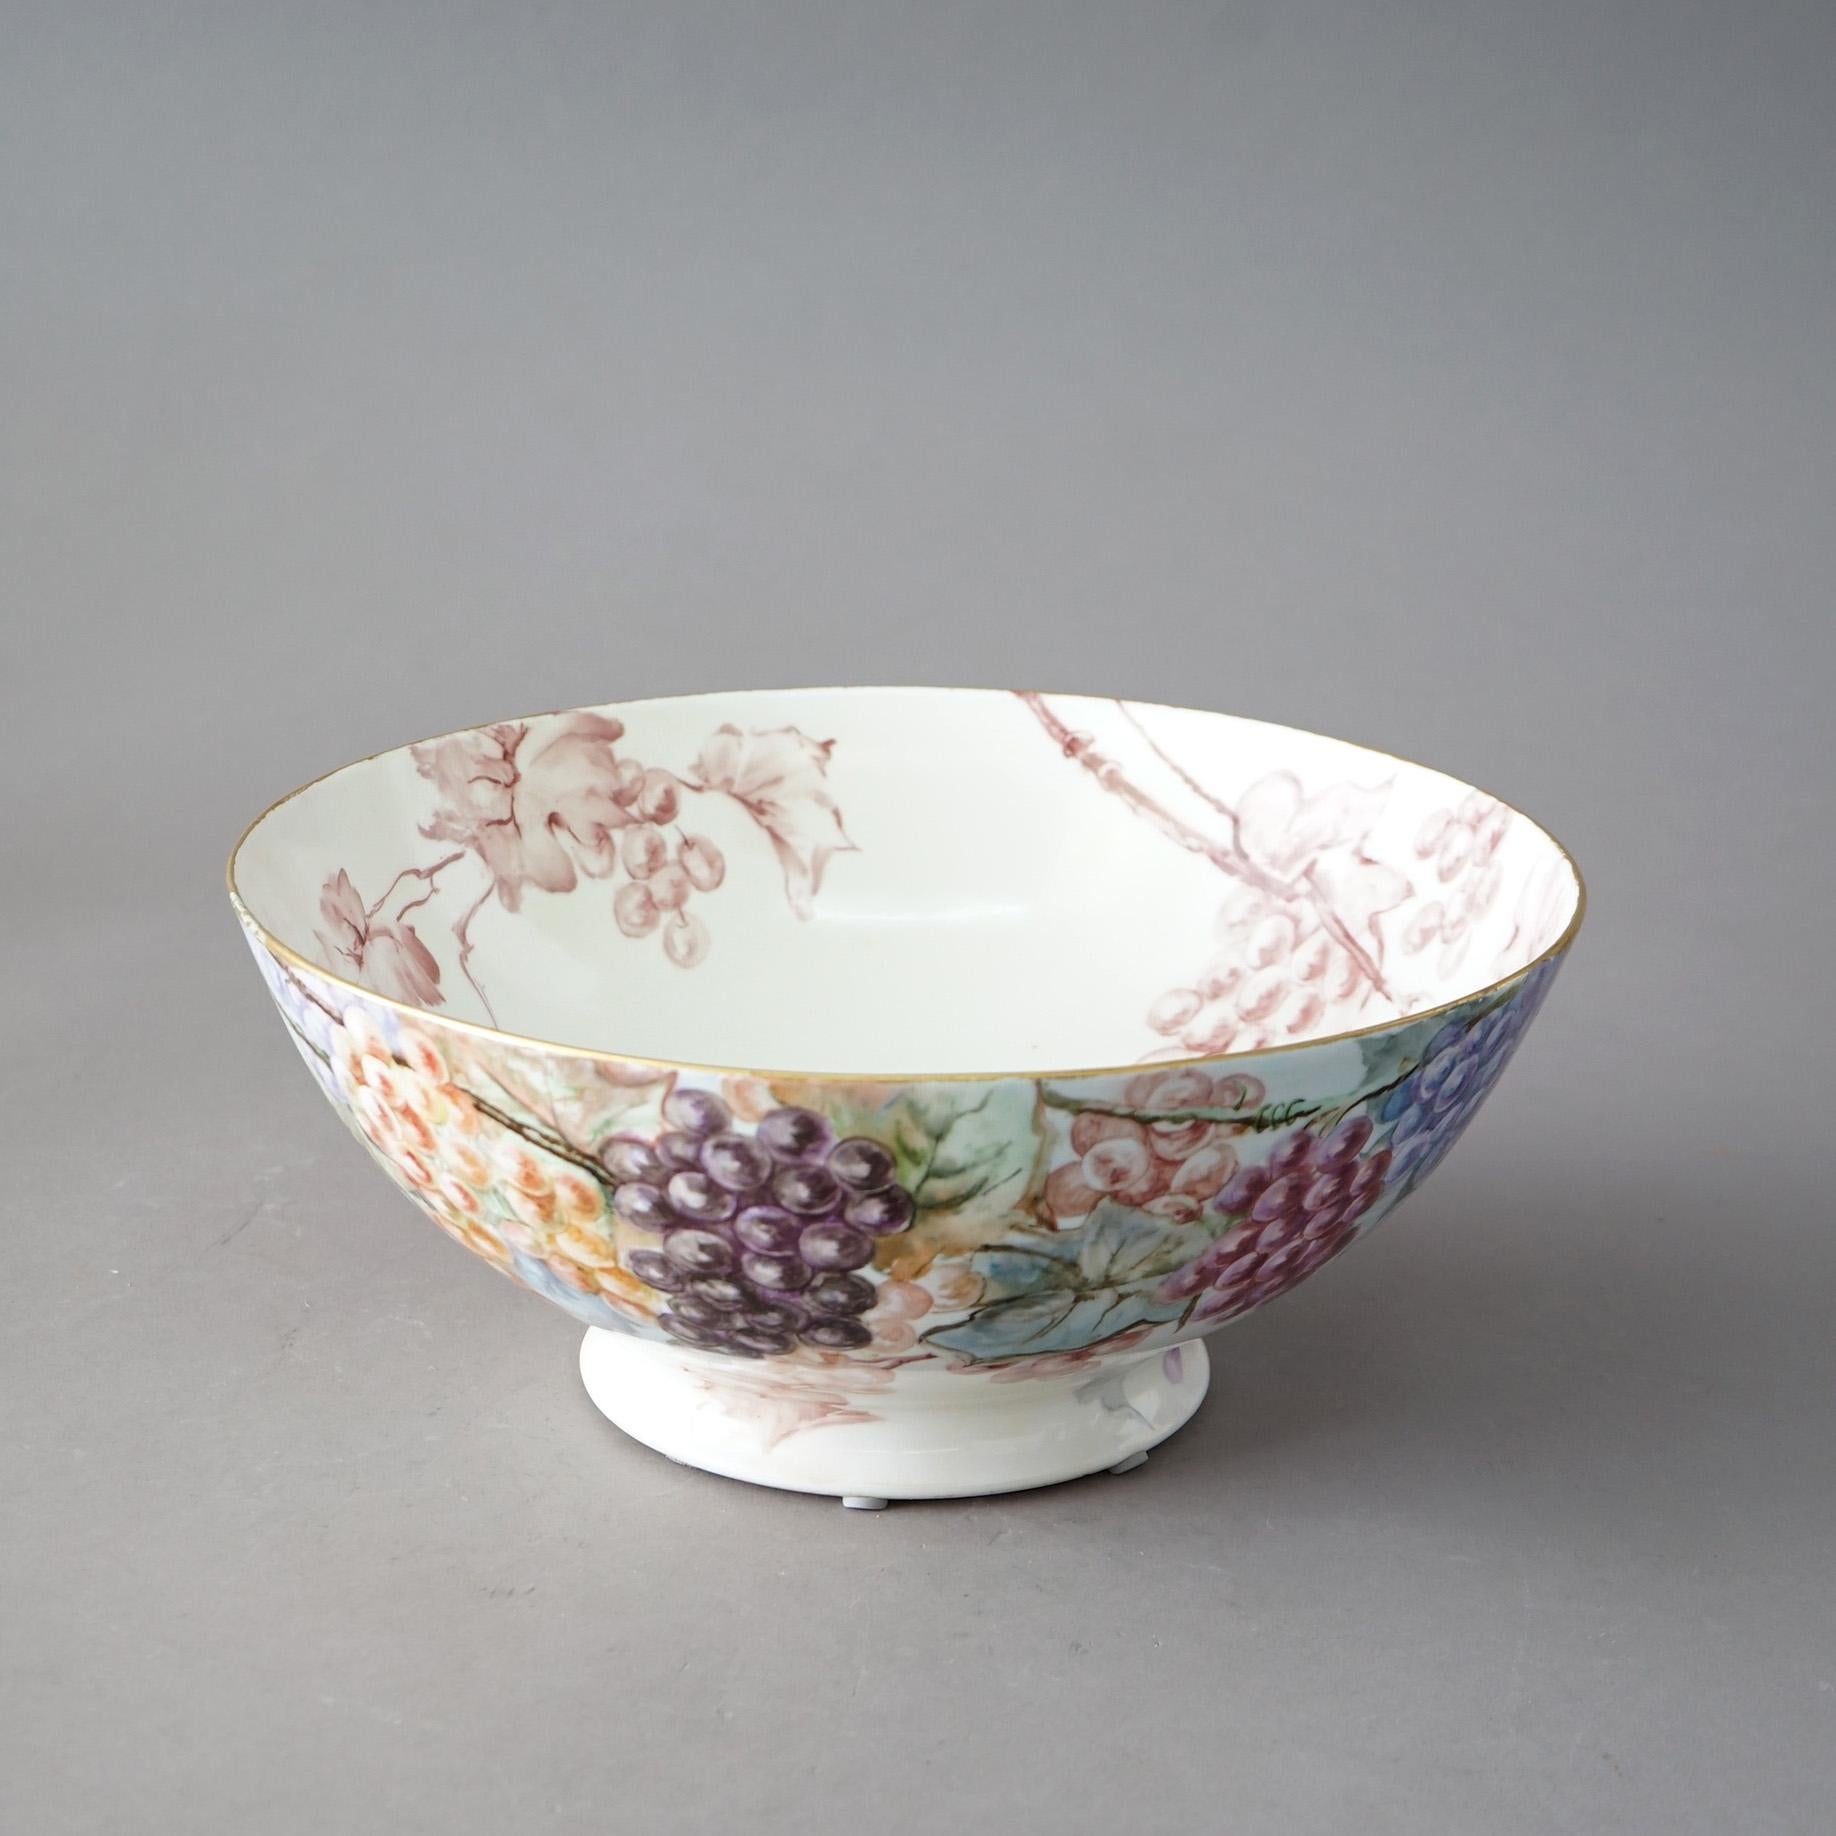 An antique French Limoges center bowl offers porcelain construction with hand painted floral, grape & spider web design, c1900

Measures - 6.25